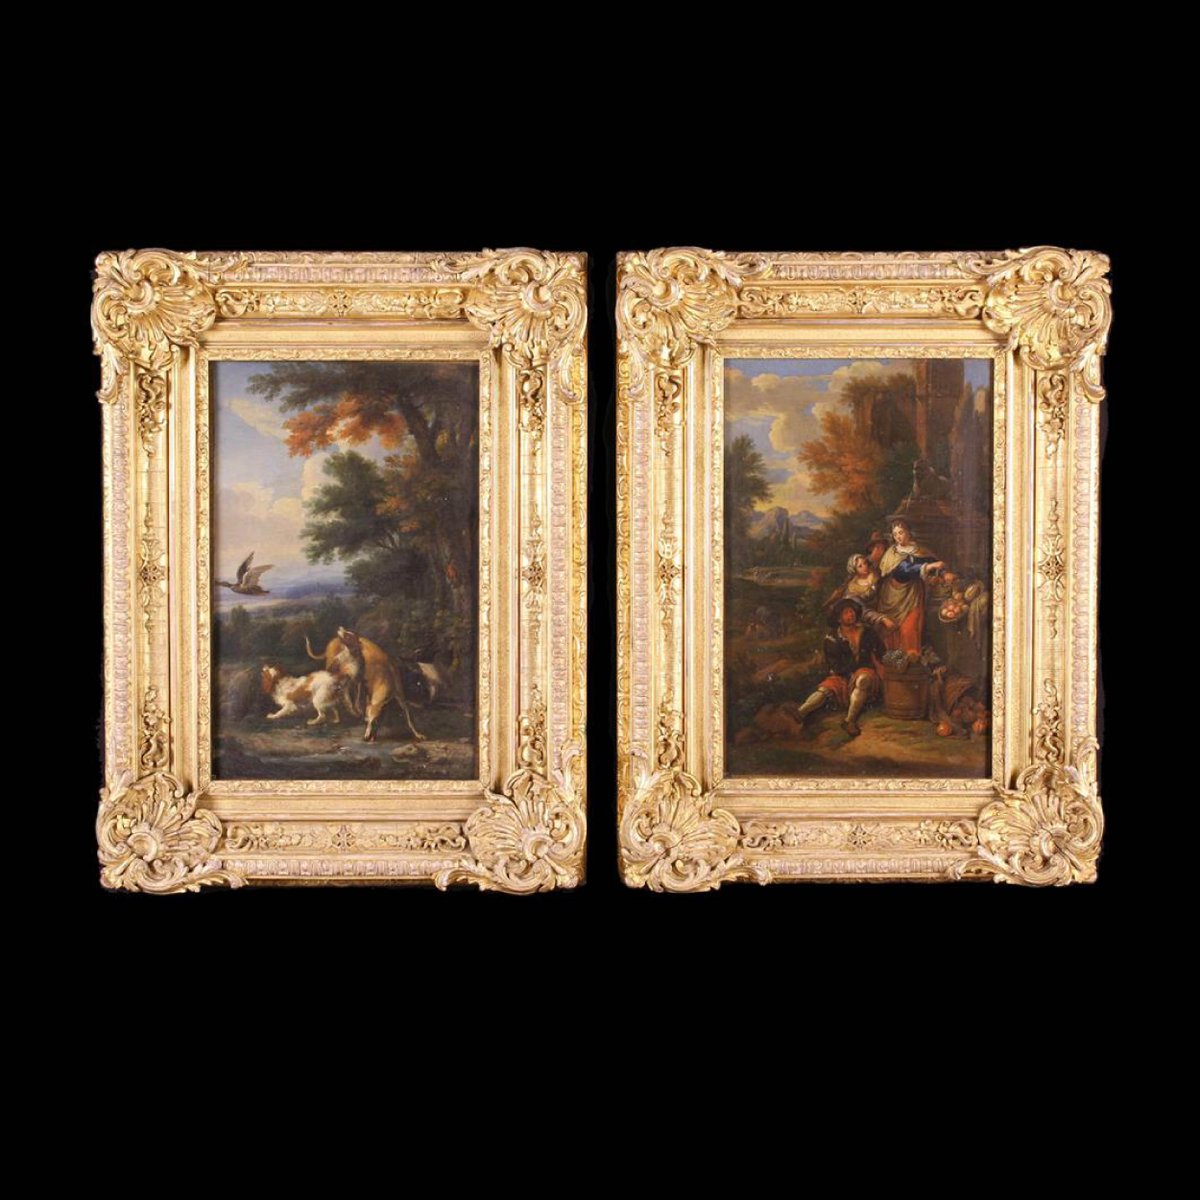 Did you get this delightful pair? A Pair of 19th Century Oils of Canvas. Hammer £1,900. #auction #onlineauction #auctionhouse #auctioneer #vintage #auctioneers #bid #antiques #antique #auctionswork #collection #sale #finefurniture #furniture